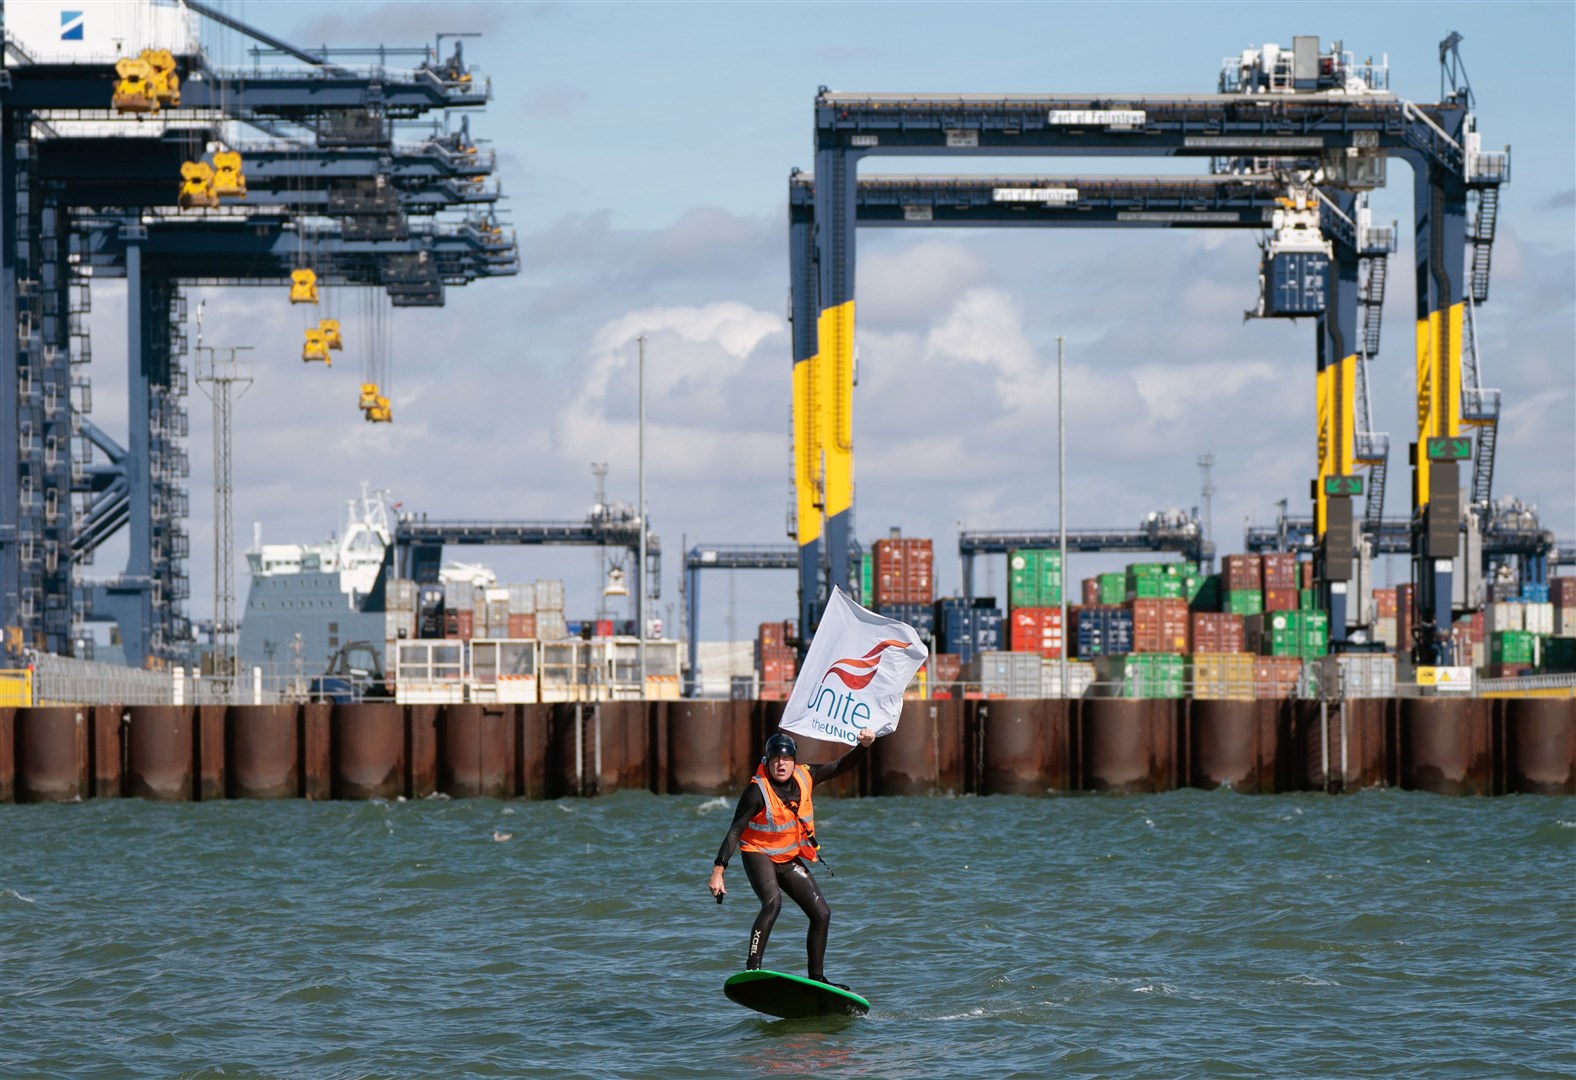 A man carrying a Unite the Union flag surfs around the Port of Felixstowe in Suffolk where members of the Unite union are on strike at Britain’s biggest and busiest container port (Joe Giddens/ PA)